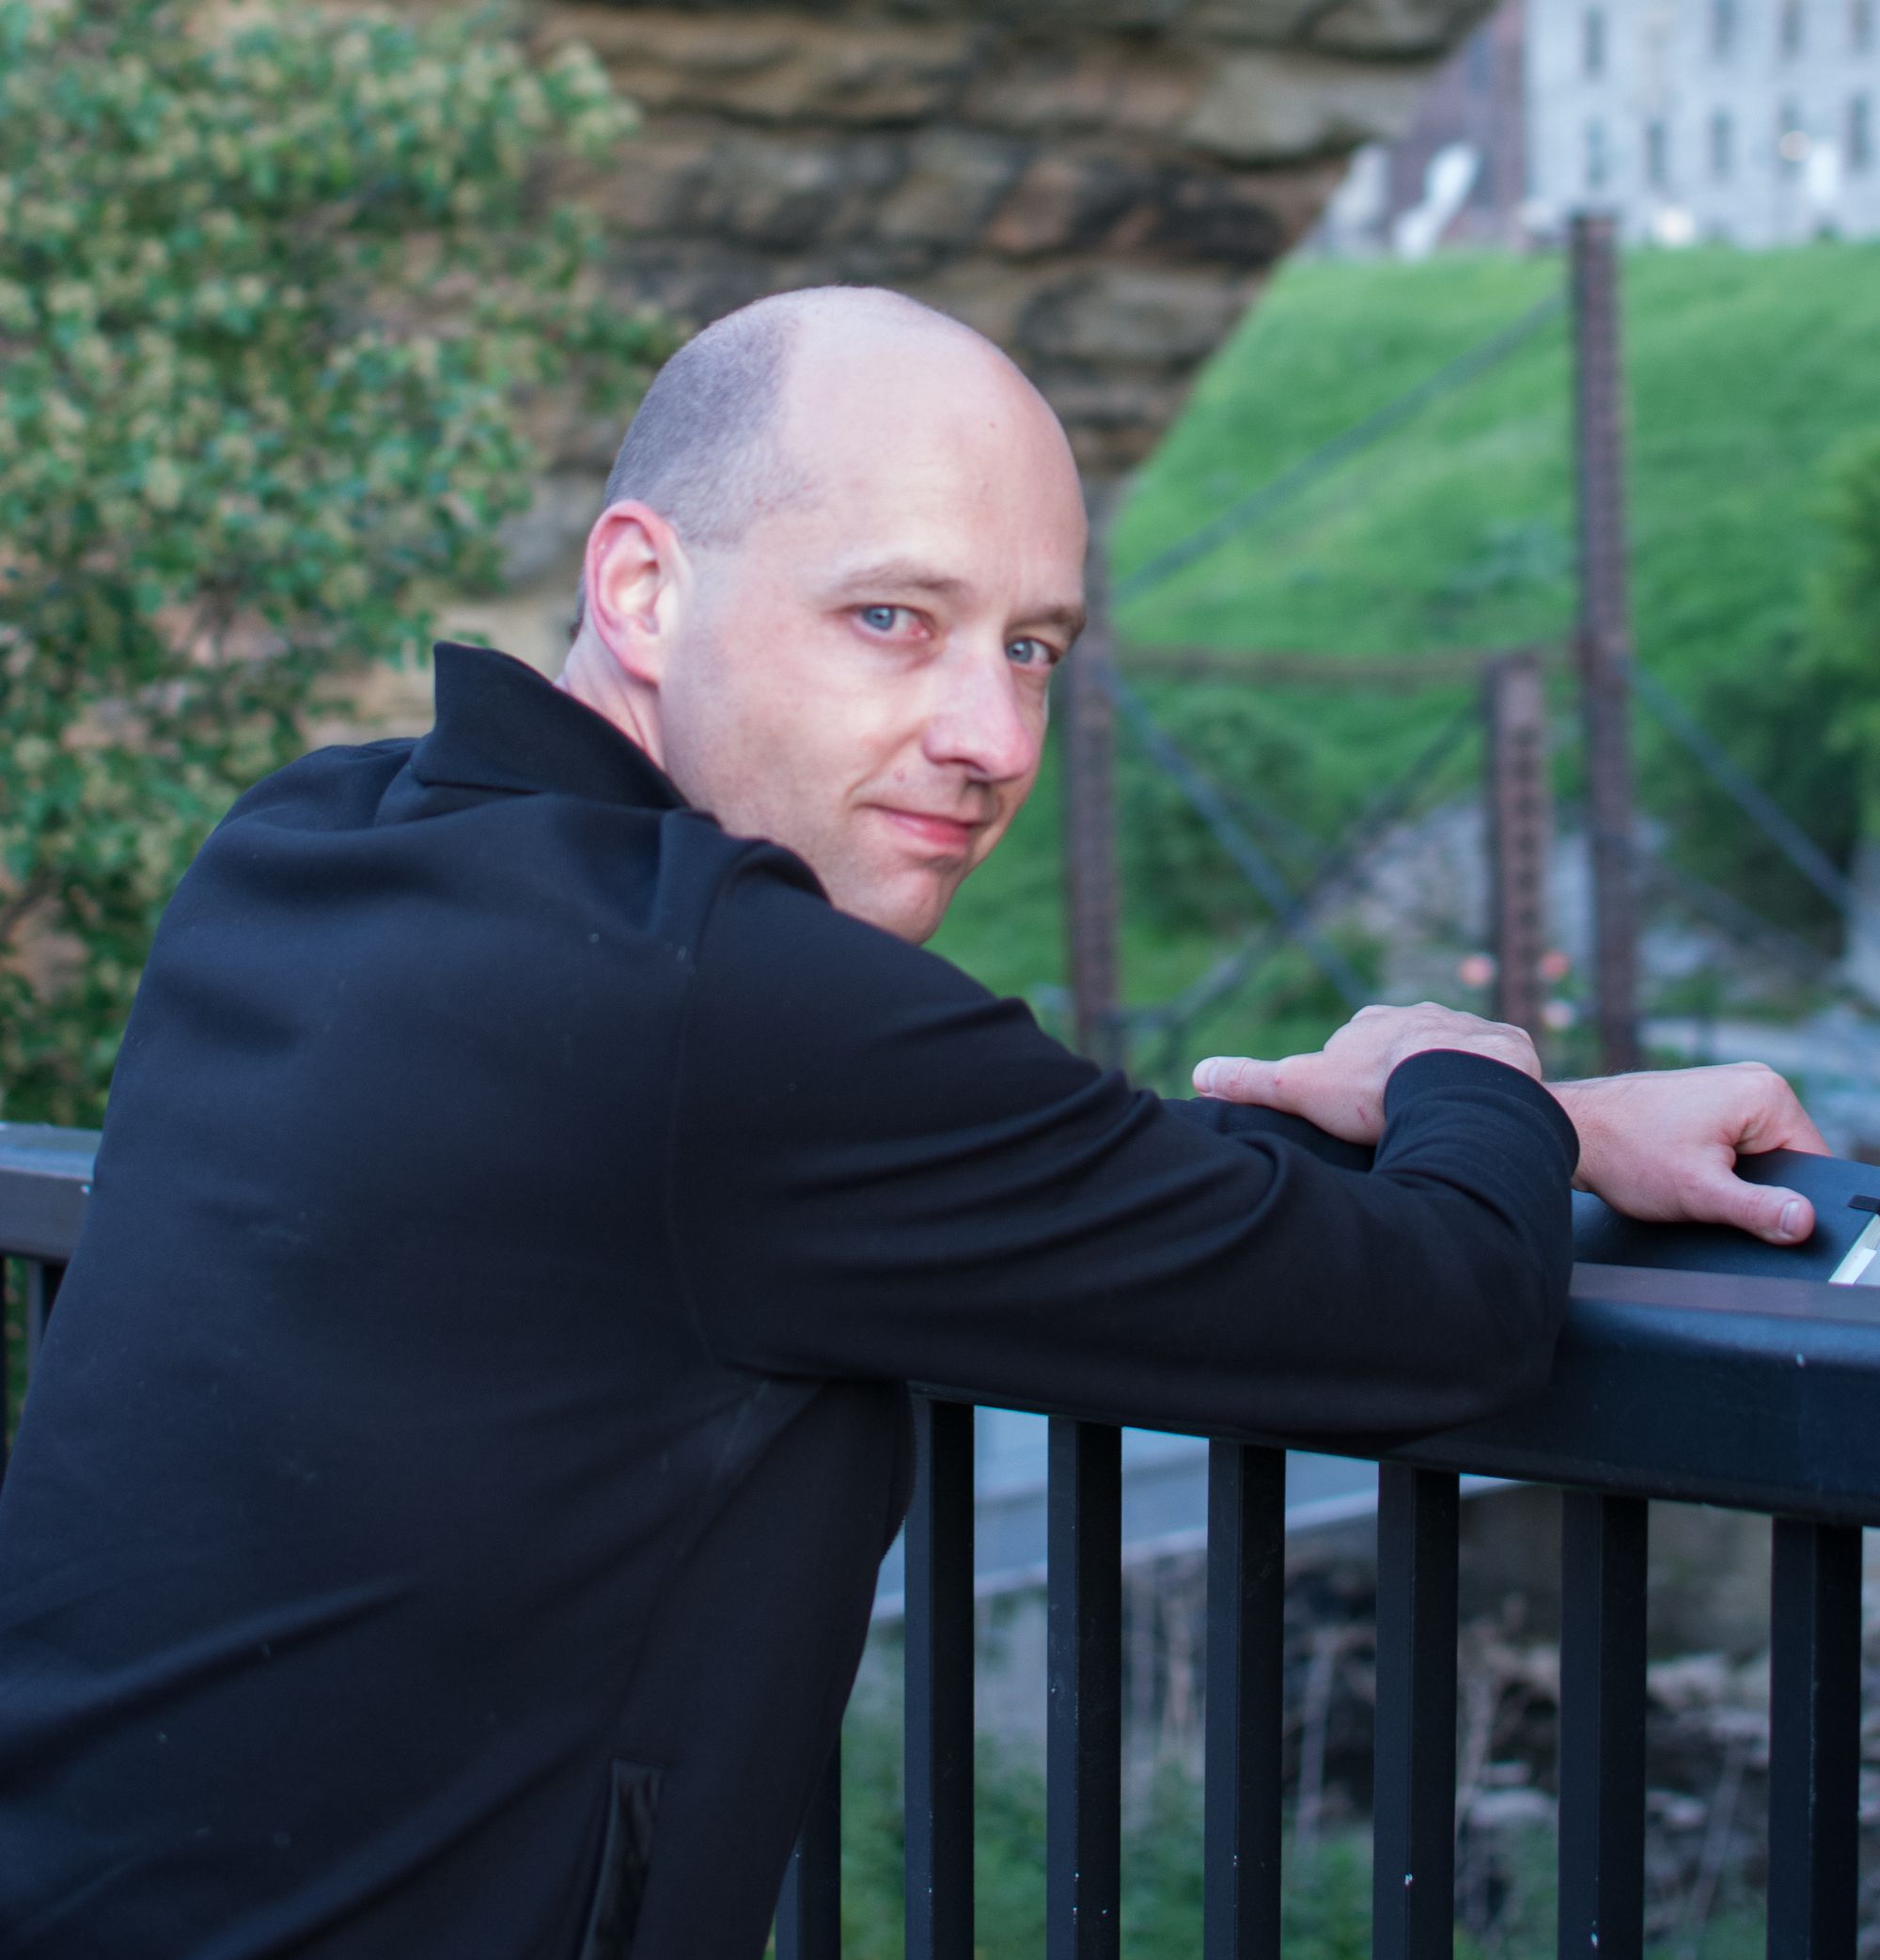 Steffen looking over shoulder at camera while leaning on railing overlooking park and industrial landscape